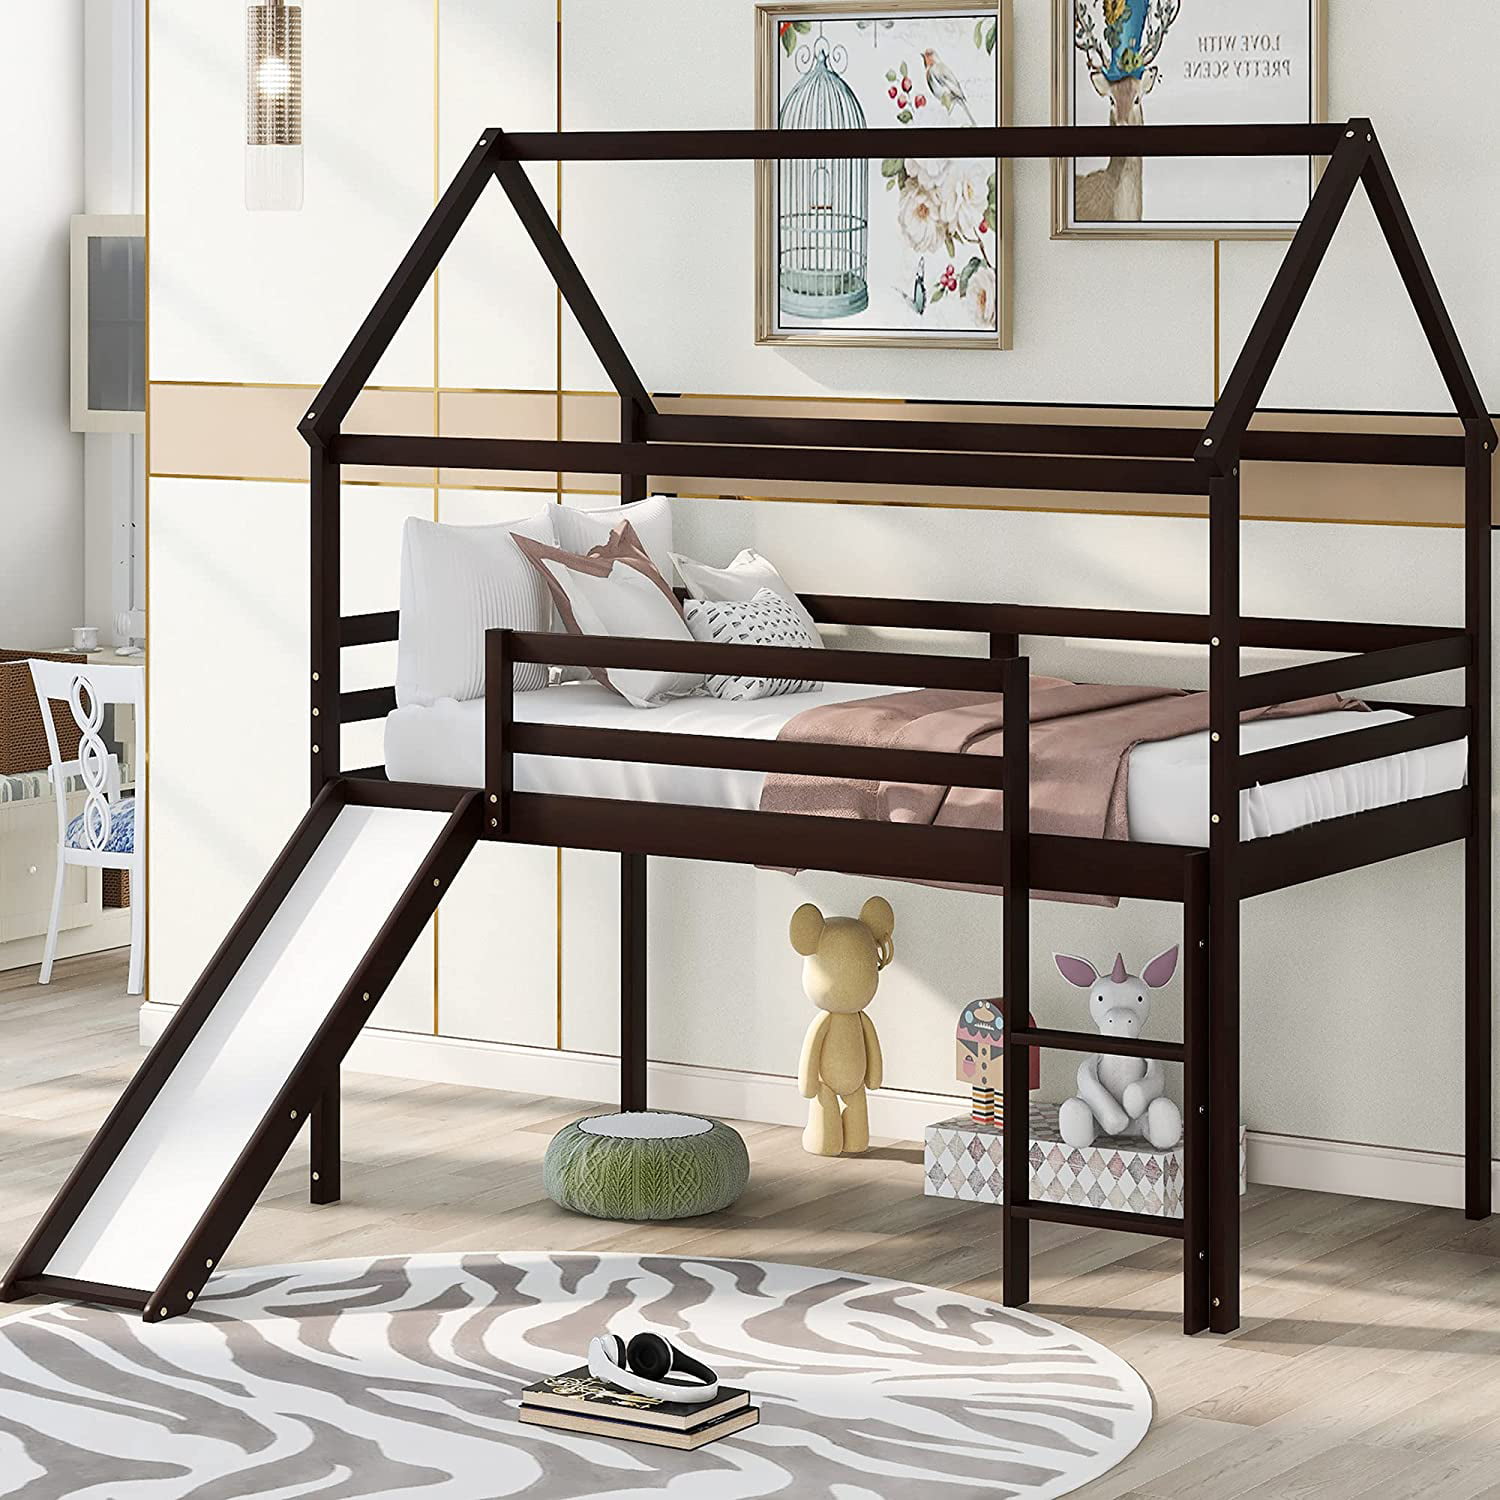 Twin Size Loft Bed With Slide House, Princess Loft Bed With Slide Instructions